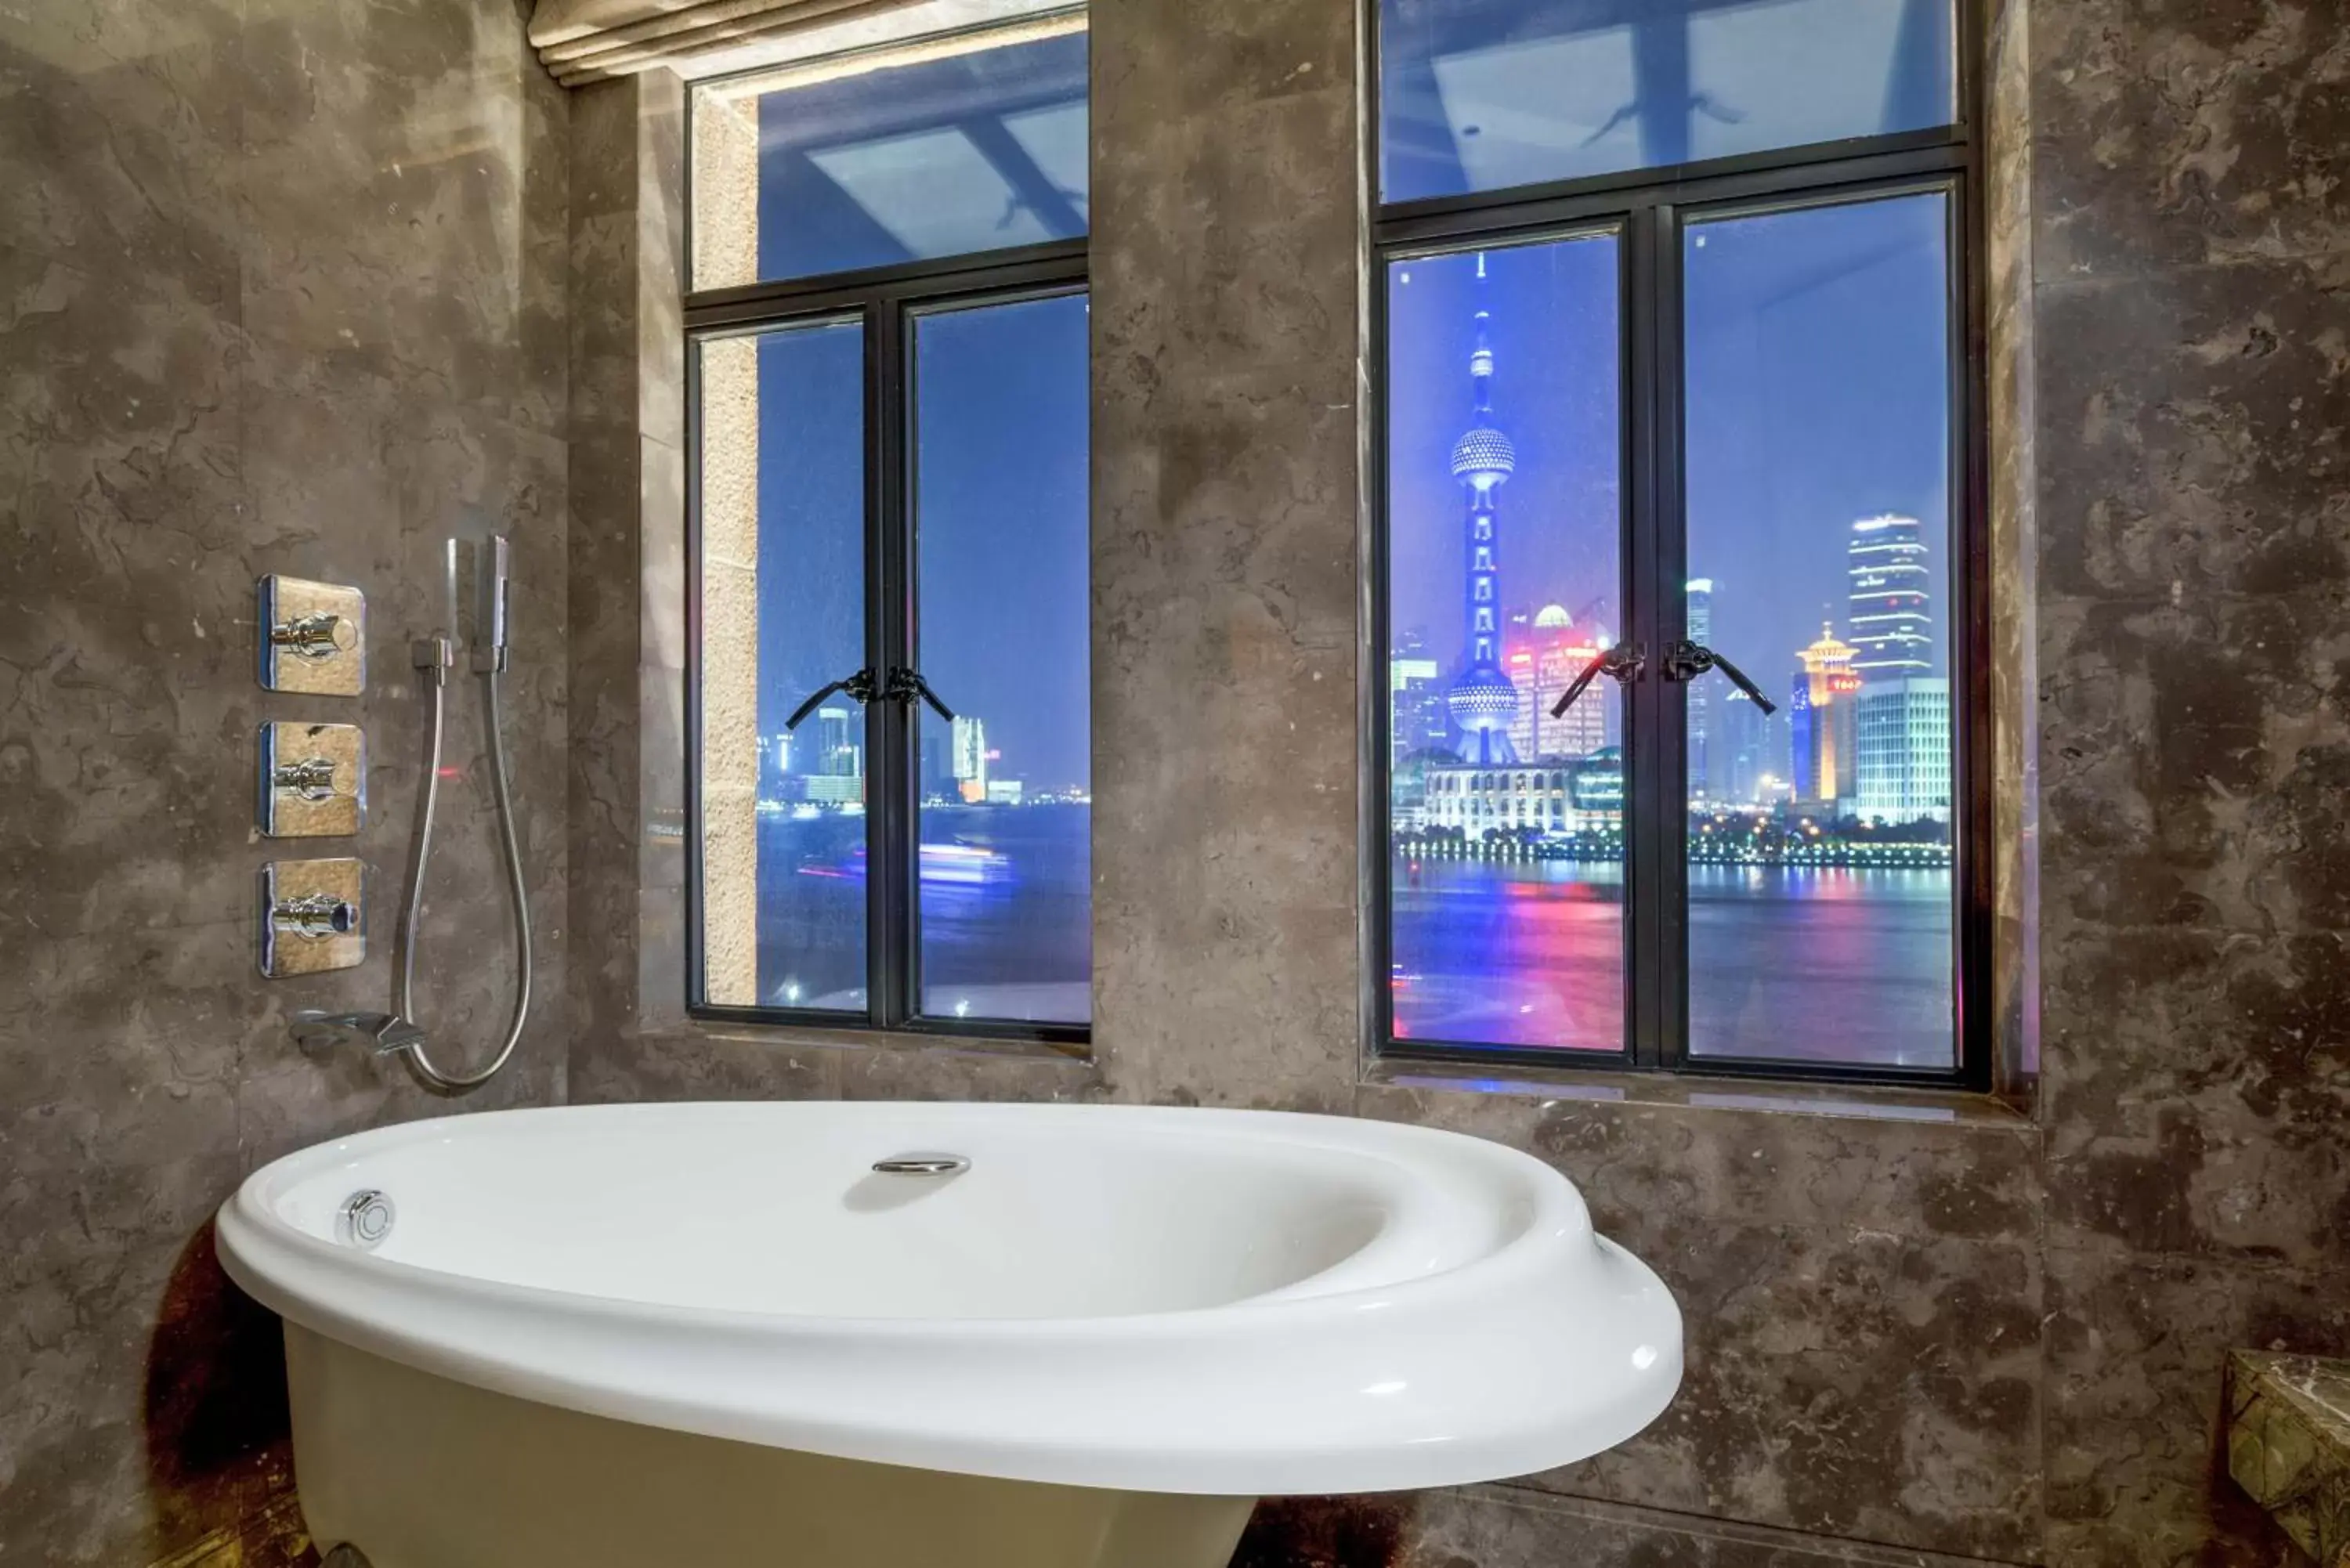 Bathroom in Fairmont Peace Hotel On the Bund (Start your own story with the BUND)